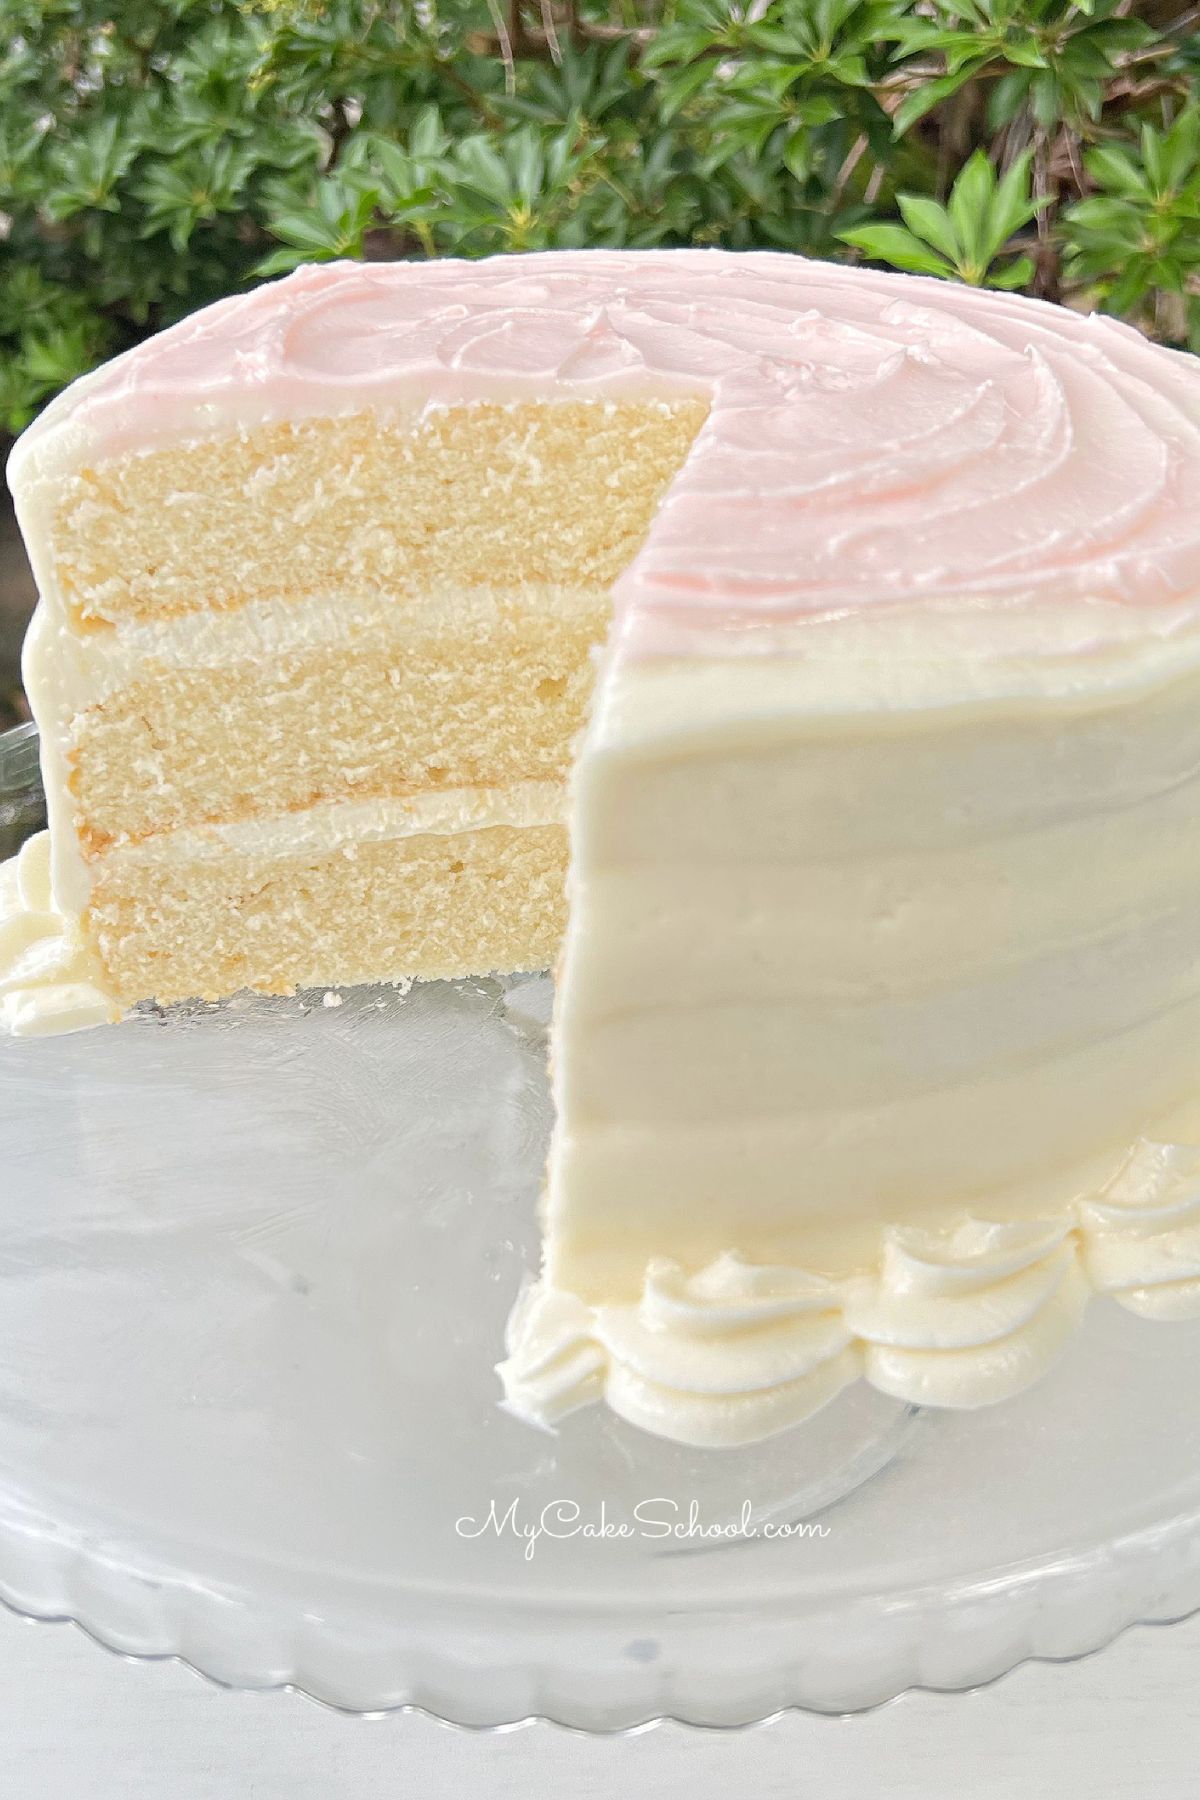 Sliced homemade white cake on glass pedestal. White frosting with light pink frosting swirls on top.